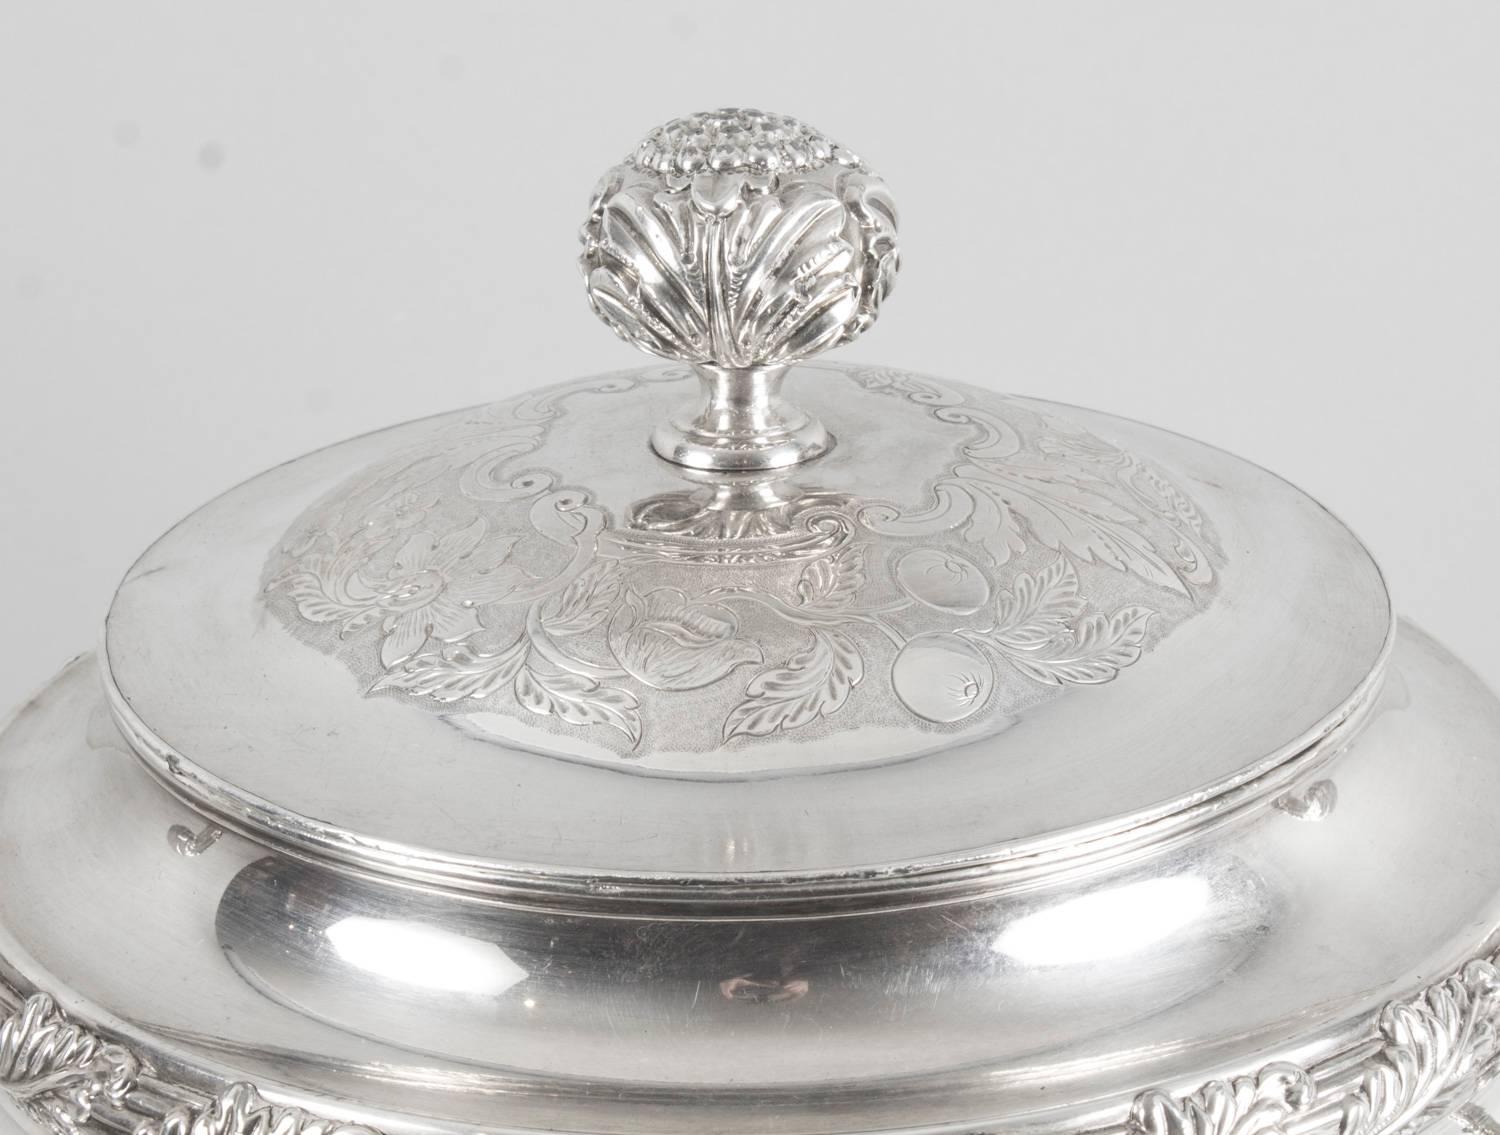 This is a wonderful antique Regency Old Sheffield silver plated Samovar, Circa 1830 in date.

It is silver plated on copper and has beautiful embossed and engraved foliate and floral decoration.

A traditional samovar consists of a large metal